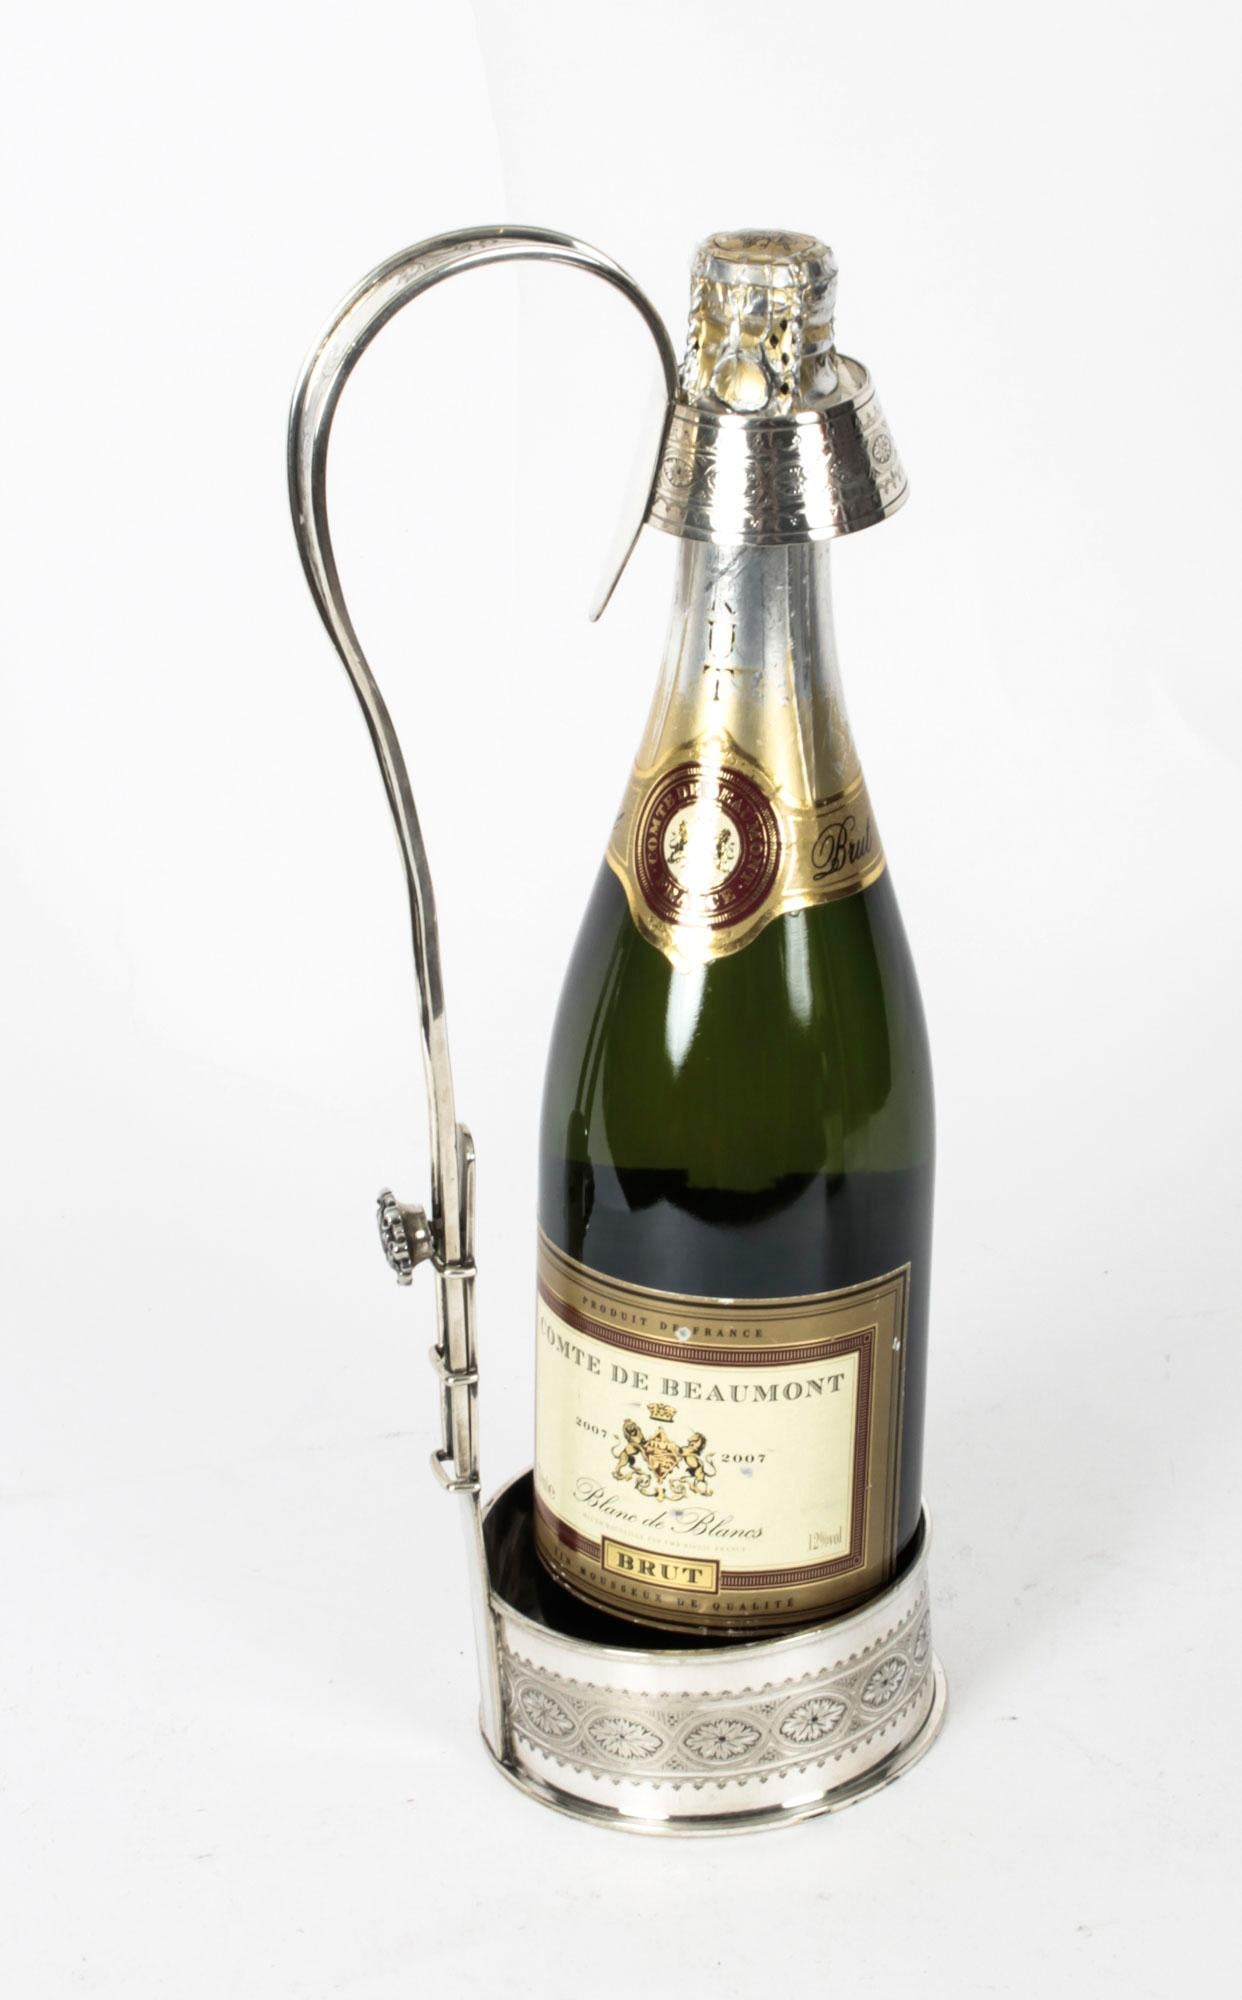 A very good quality late Victorian silver plated wine or Champagne pourer by Ekinngton & Co, circa 1880 in date.

It features an extendable handle and butterfly screw locking mechanism.
The scroll handle leads down to a circular gallery base and